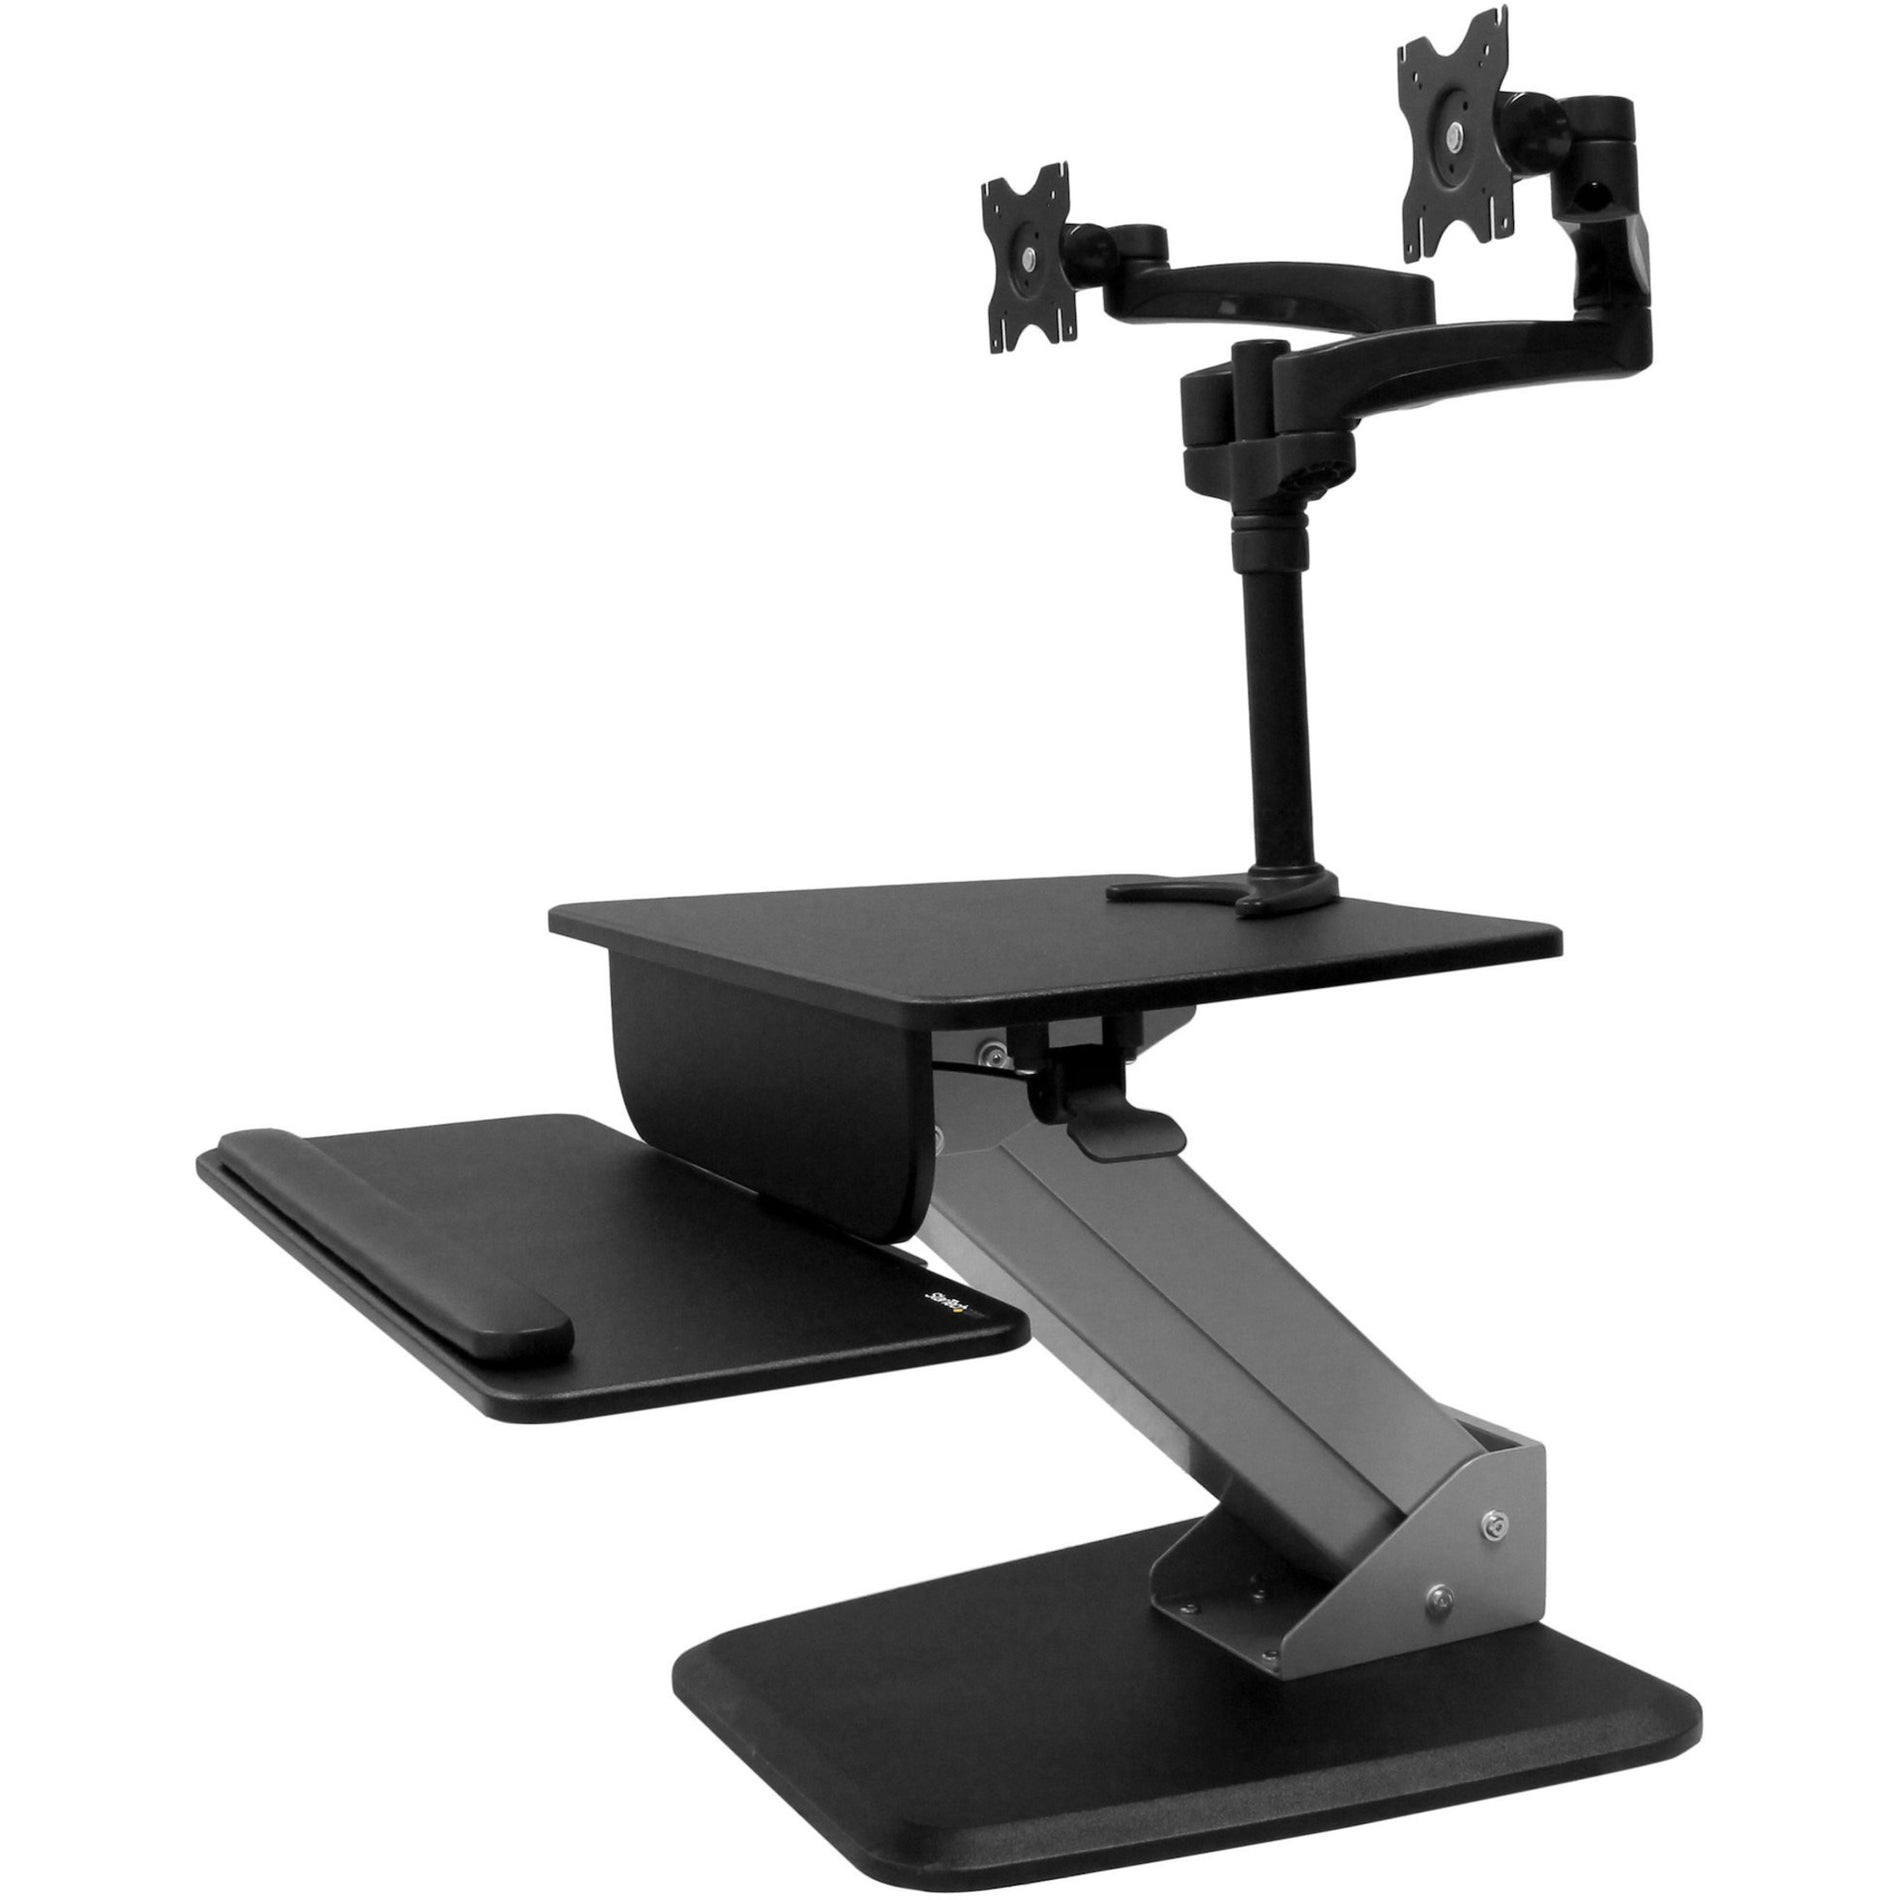 StarTech.com BNDSTSDUAL Dual Monitor Sit-to-stand Workstation - One-Touch Height Adjustment, Pan, Tilt, Swivel, Rotation, Keyboard Tray, Compact, Ergonomic